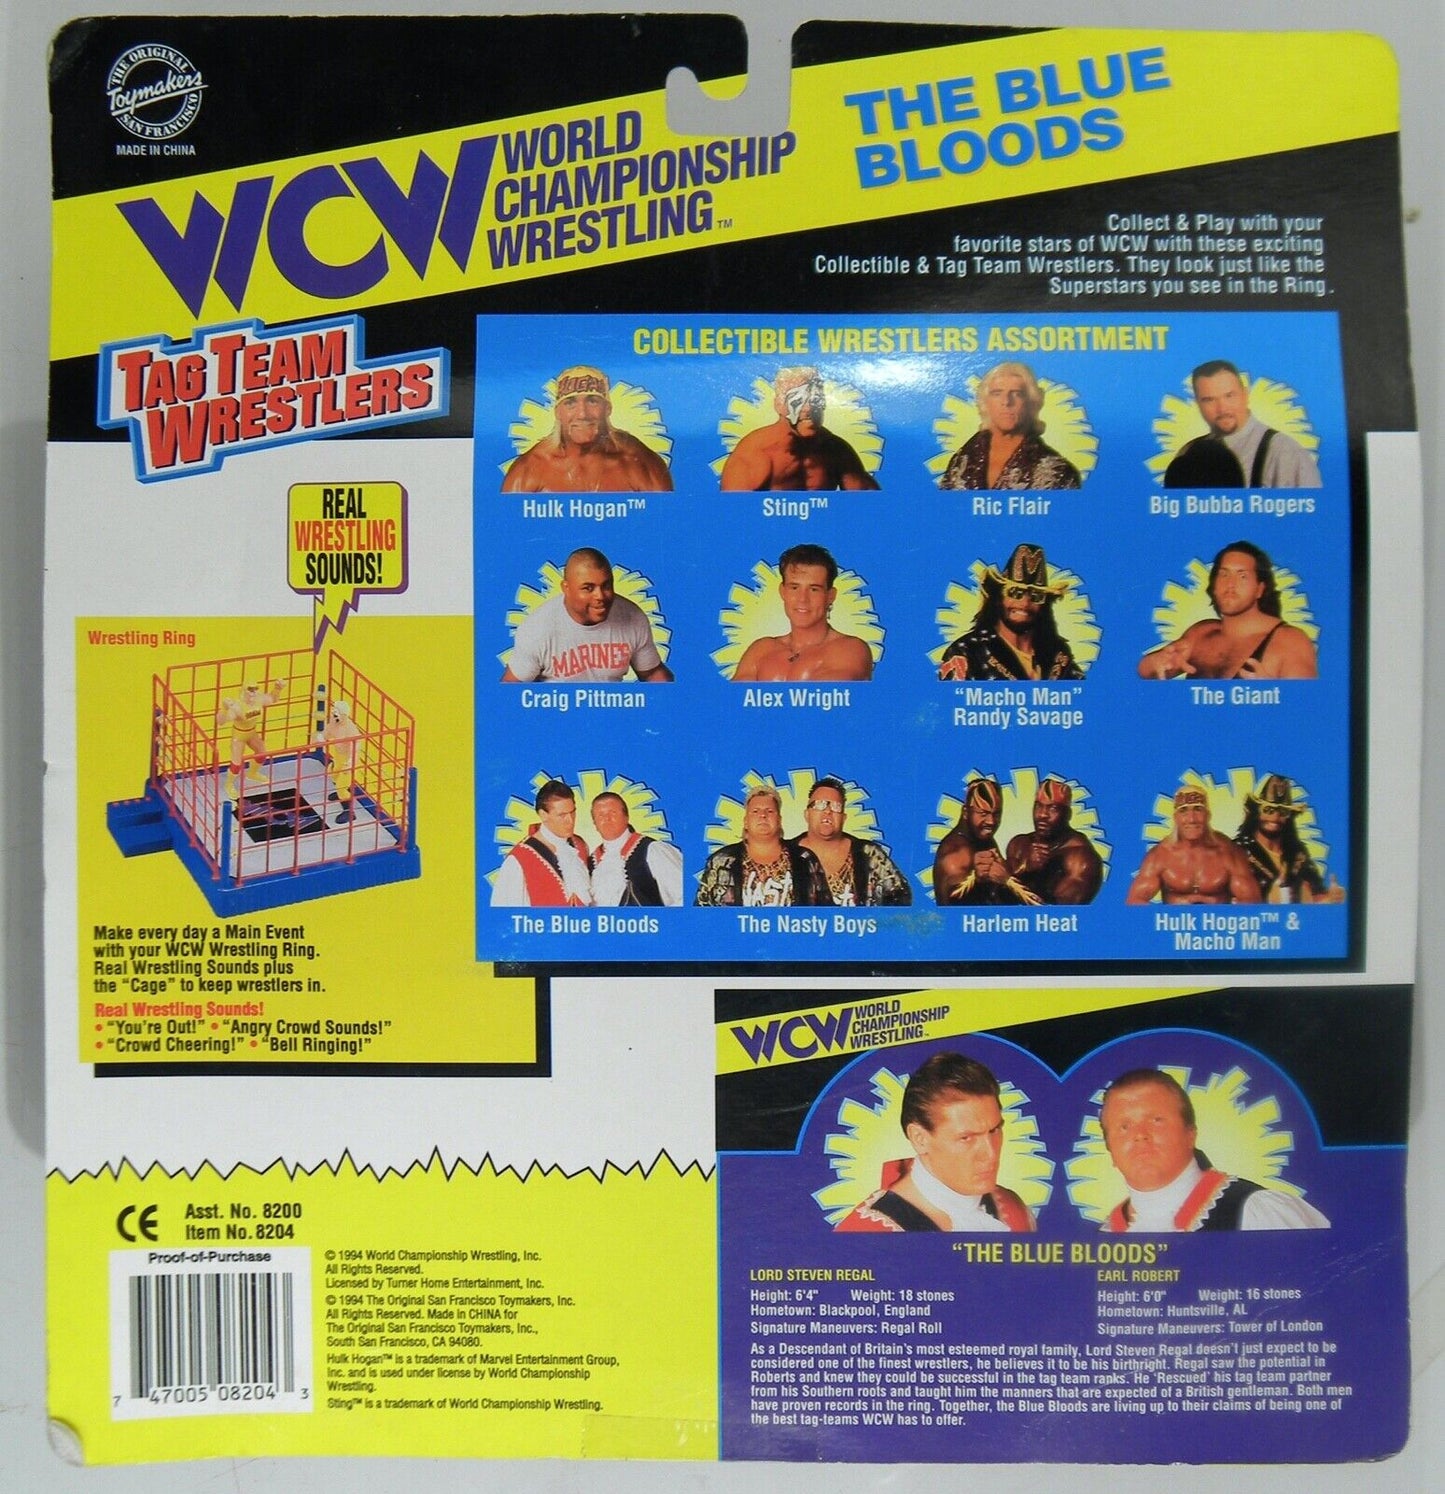 1996 WCW OSFTM Collectible Wrestlers [LJN Style] Tag Team Wrestlers Series 3 Blue Bloods: Lord Steven Regal & Earl Robert Eaton [Exclusive]